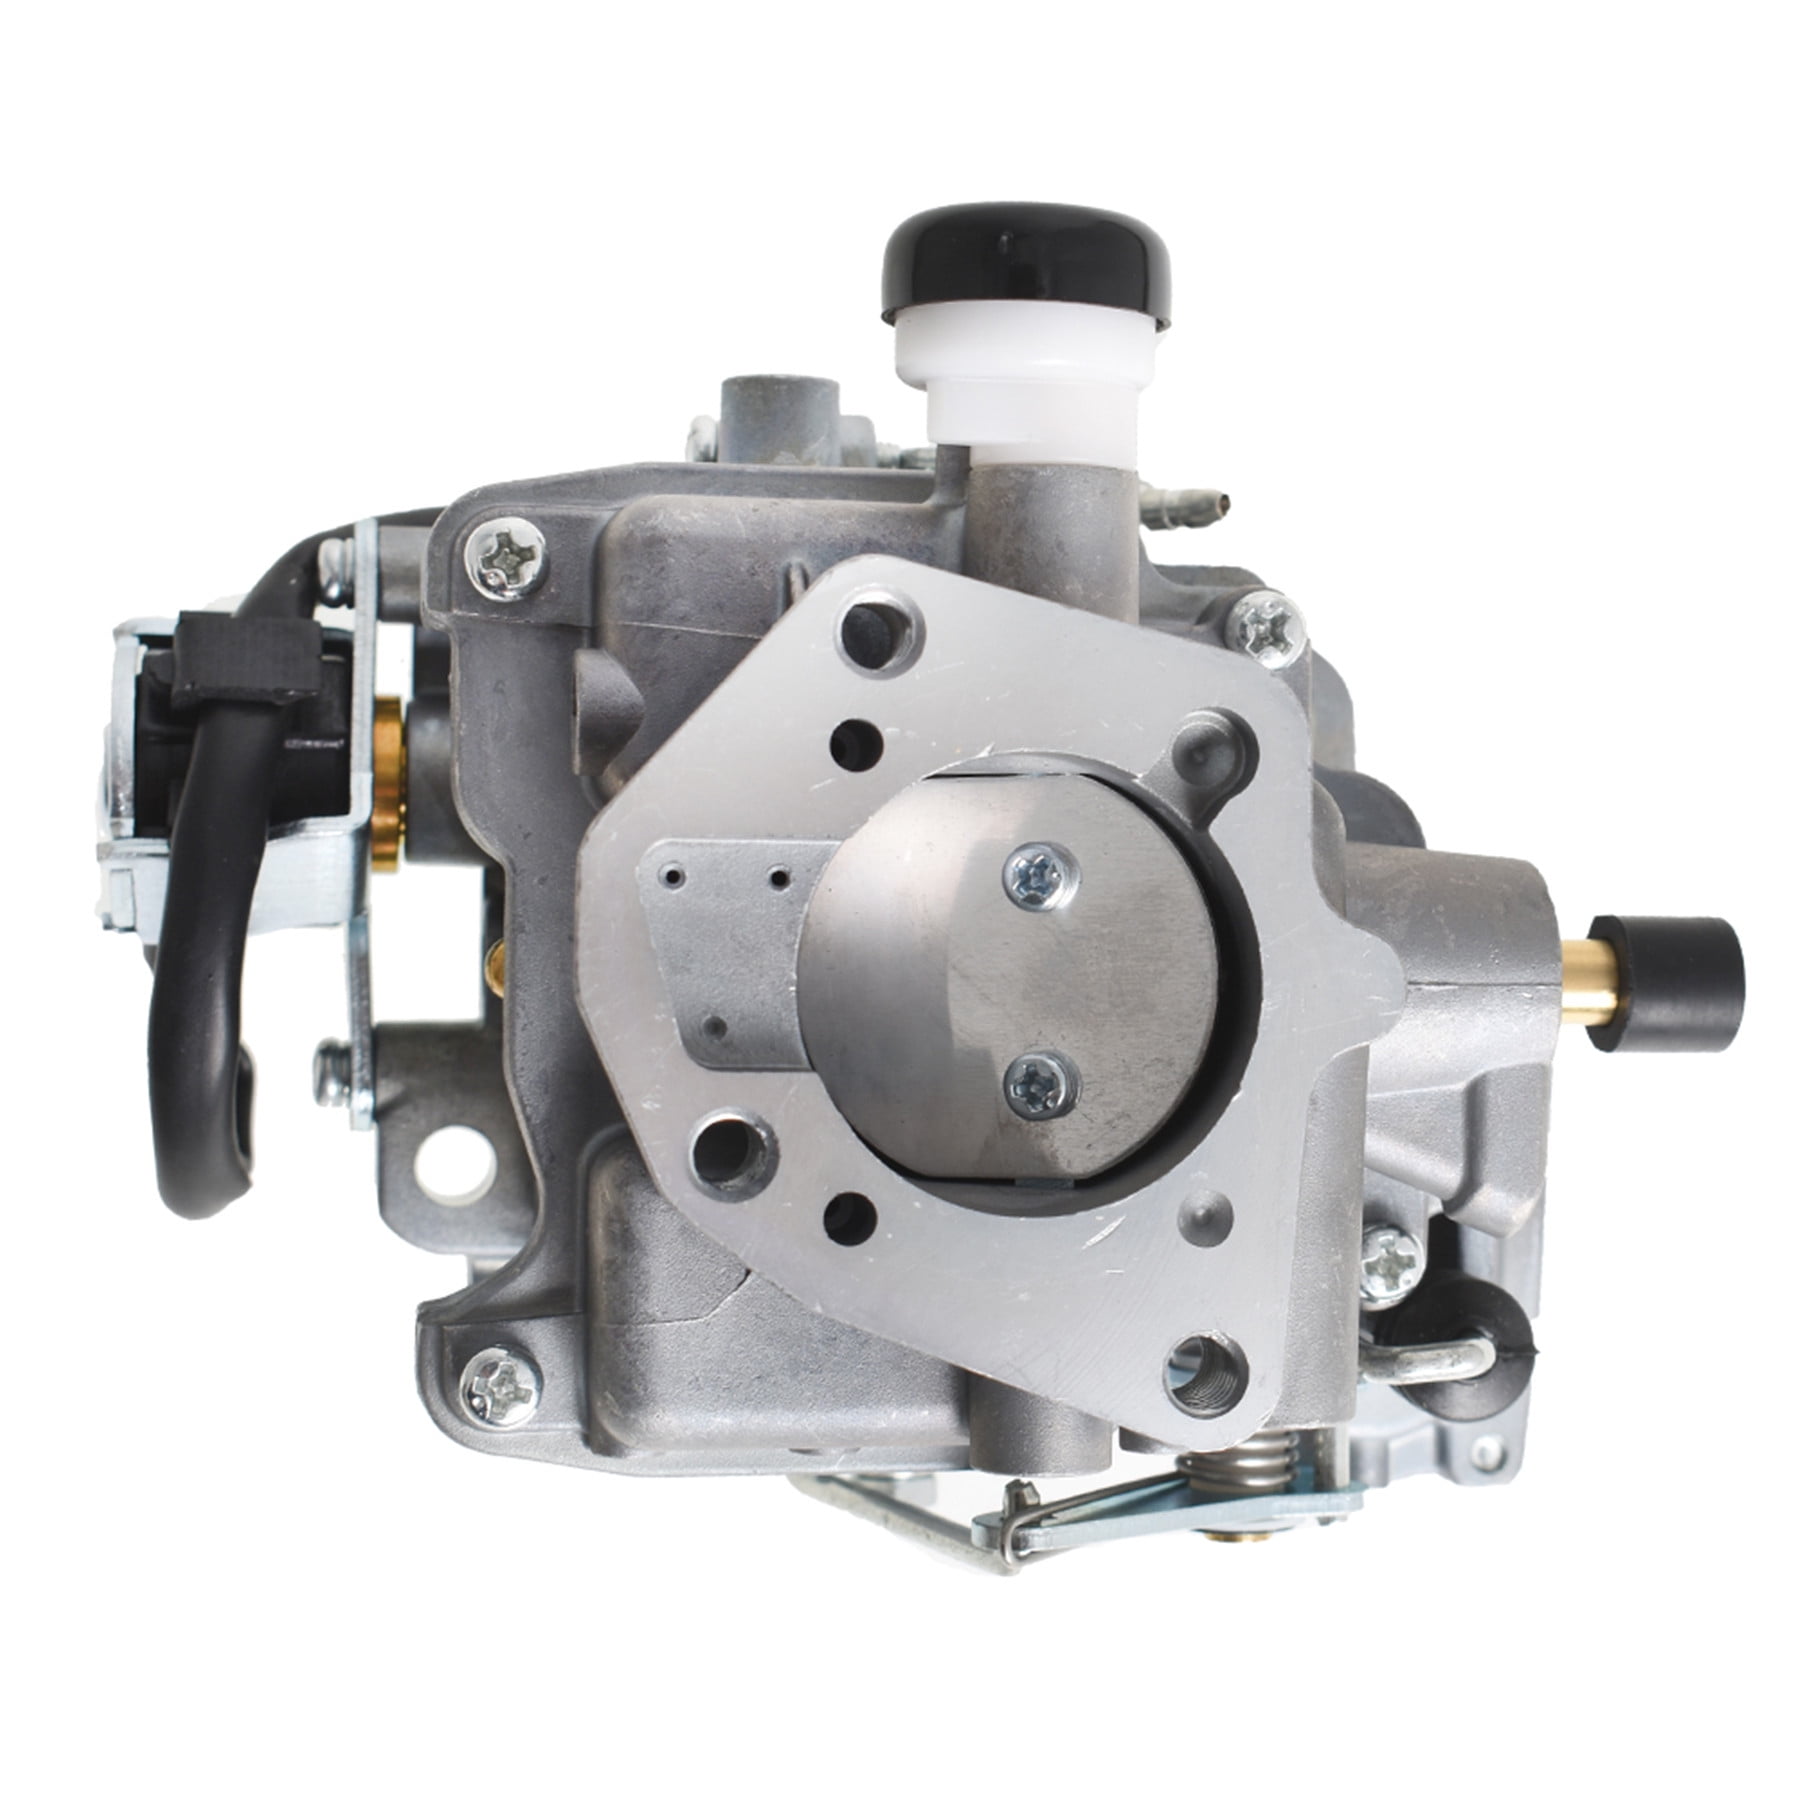 Replacement Carburetor Carb Fit For Kohler CH18 CH20 CH640 18-20.5HP  2485335-S 絶妙なデザイン